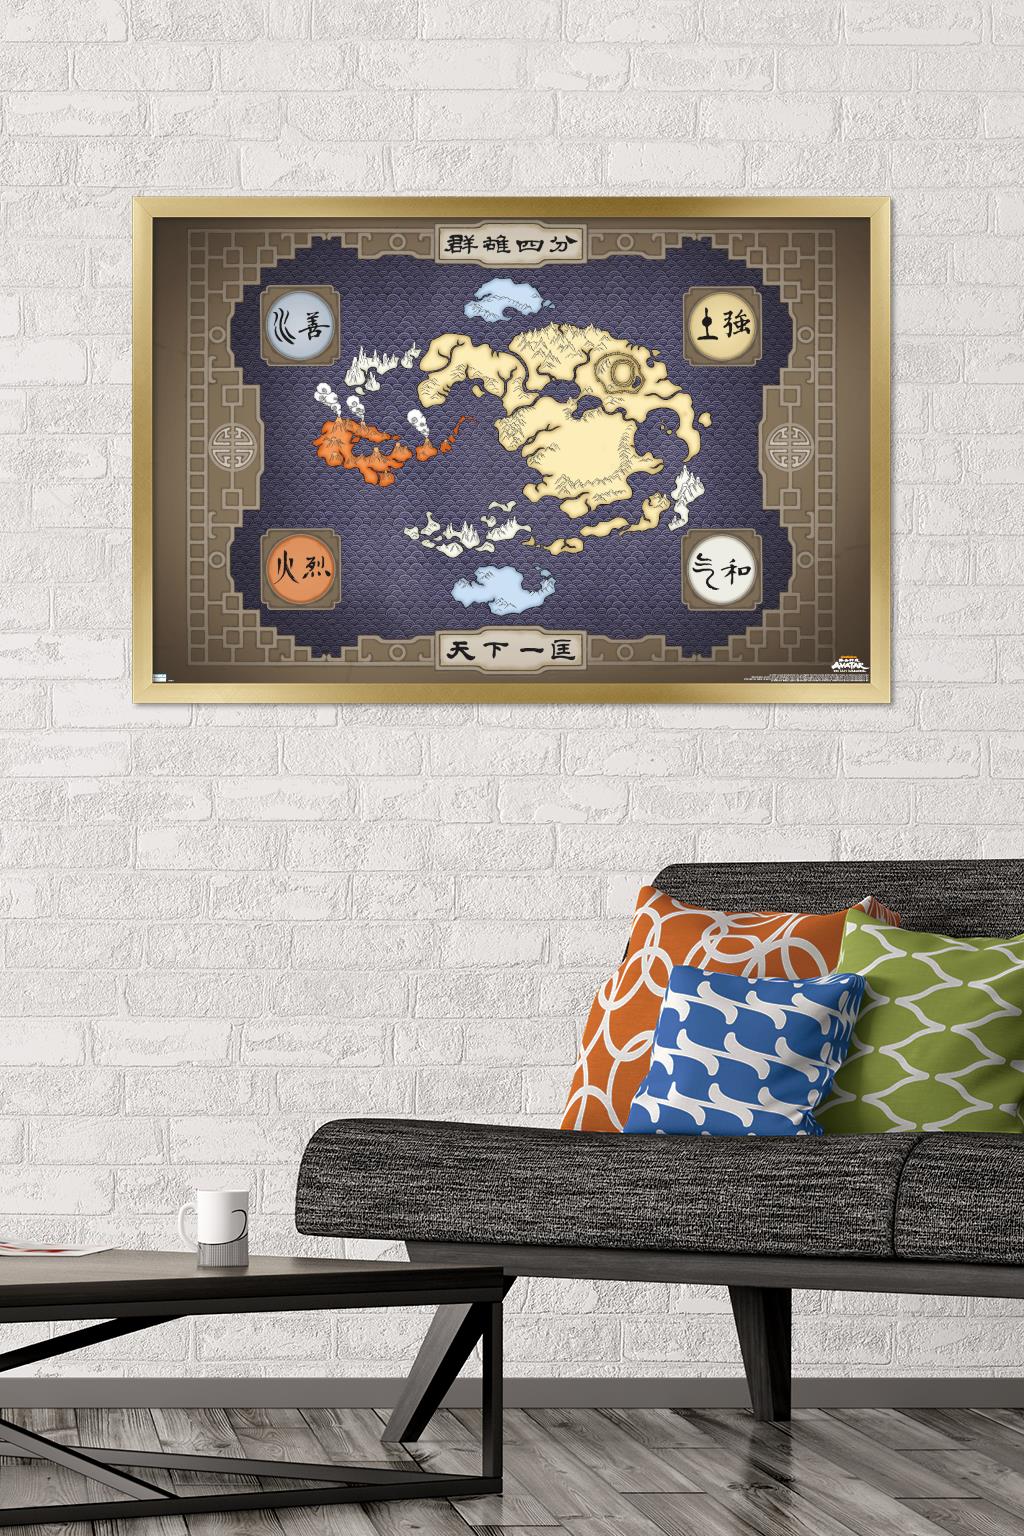 Avatar - Map Wall Poster, 22.375" x 34", Framed - image 2 of 5